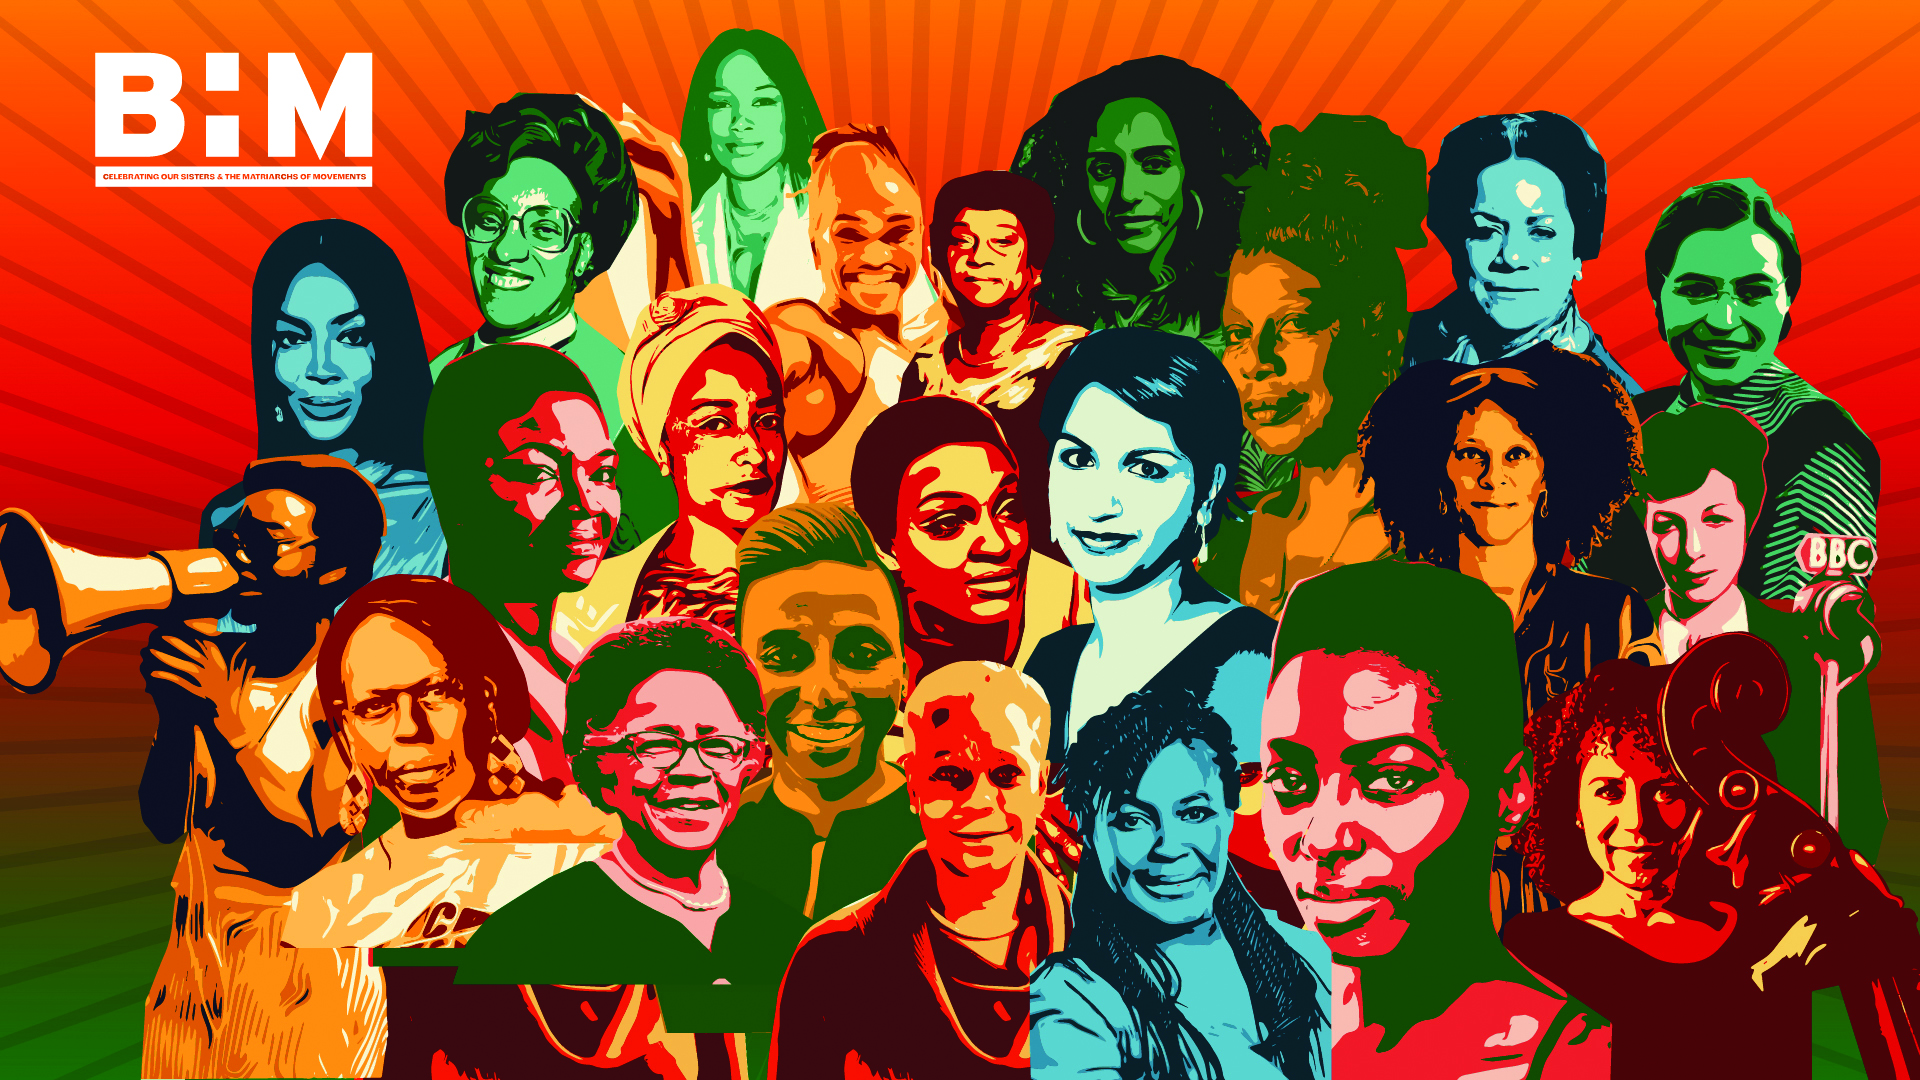 "Black History Month: celebrating our sisters and the matriarchs of movements" with stylised cutouts of many women